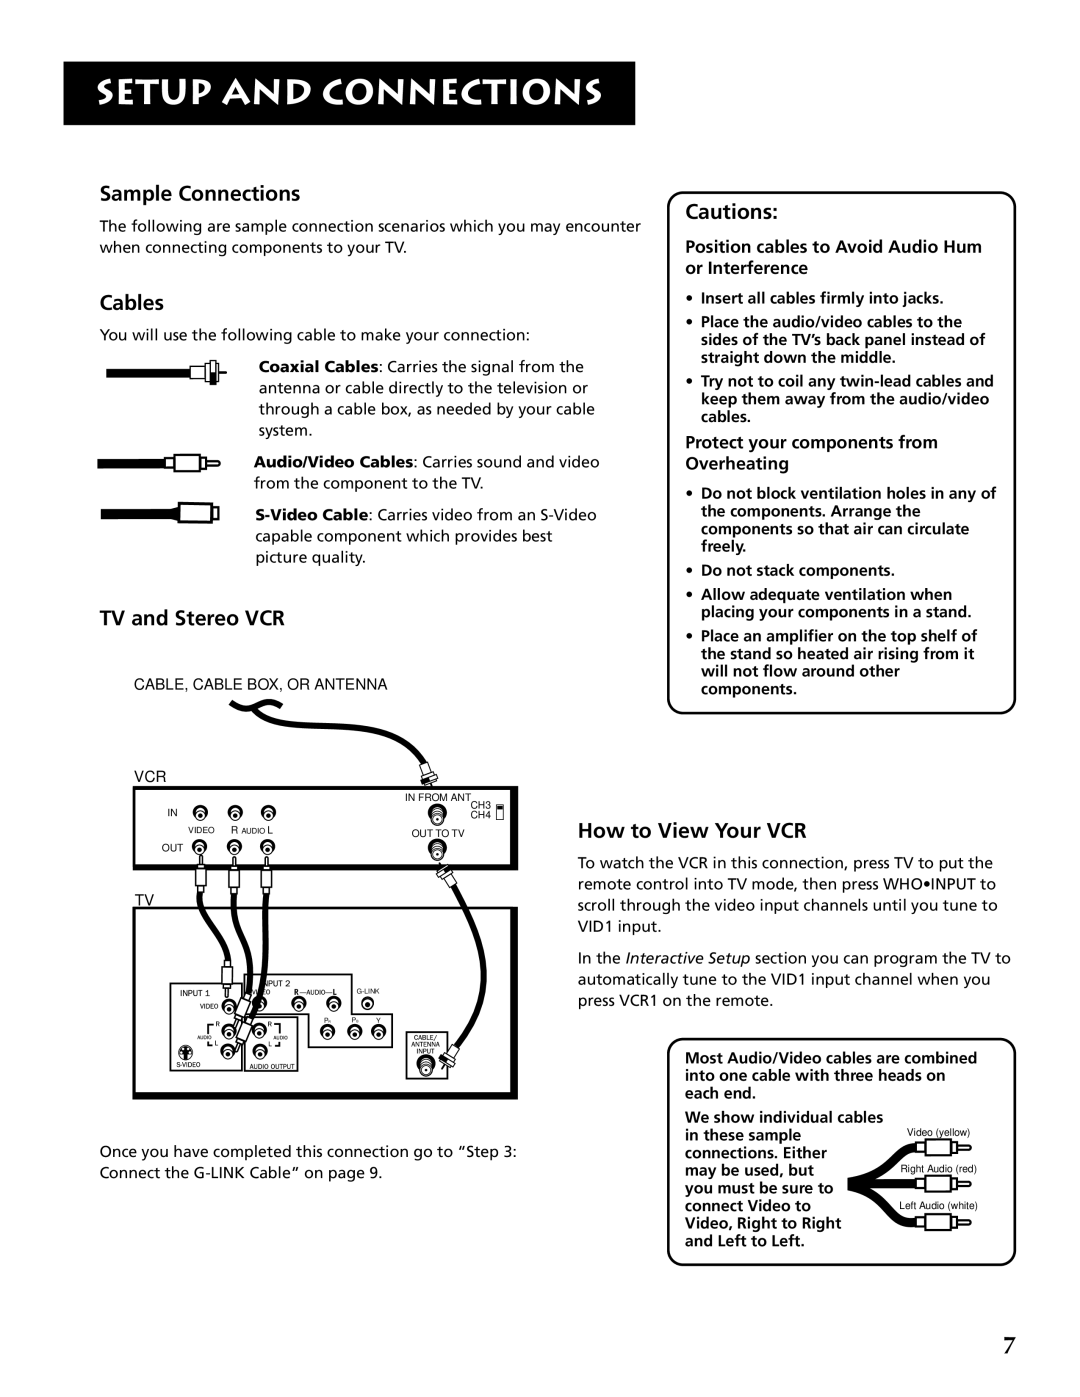 RCA F32691 Sample Connections, TV and Stereo VCR, Cautions, How to View Your VCR, Protect your components from Overheating 